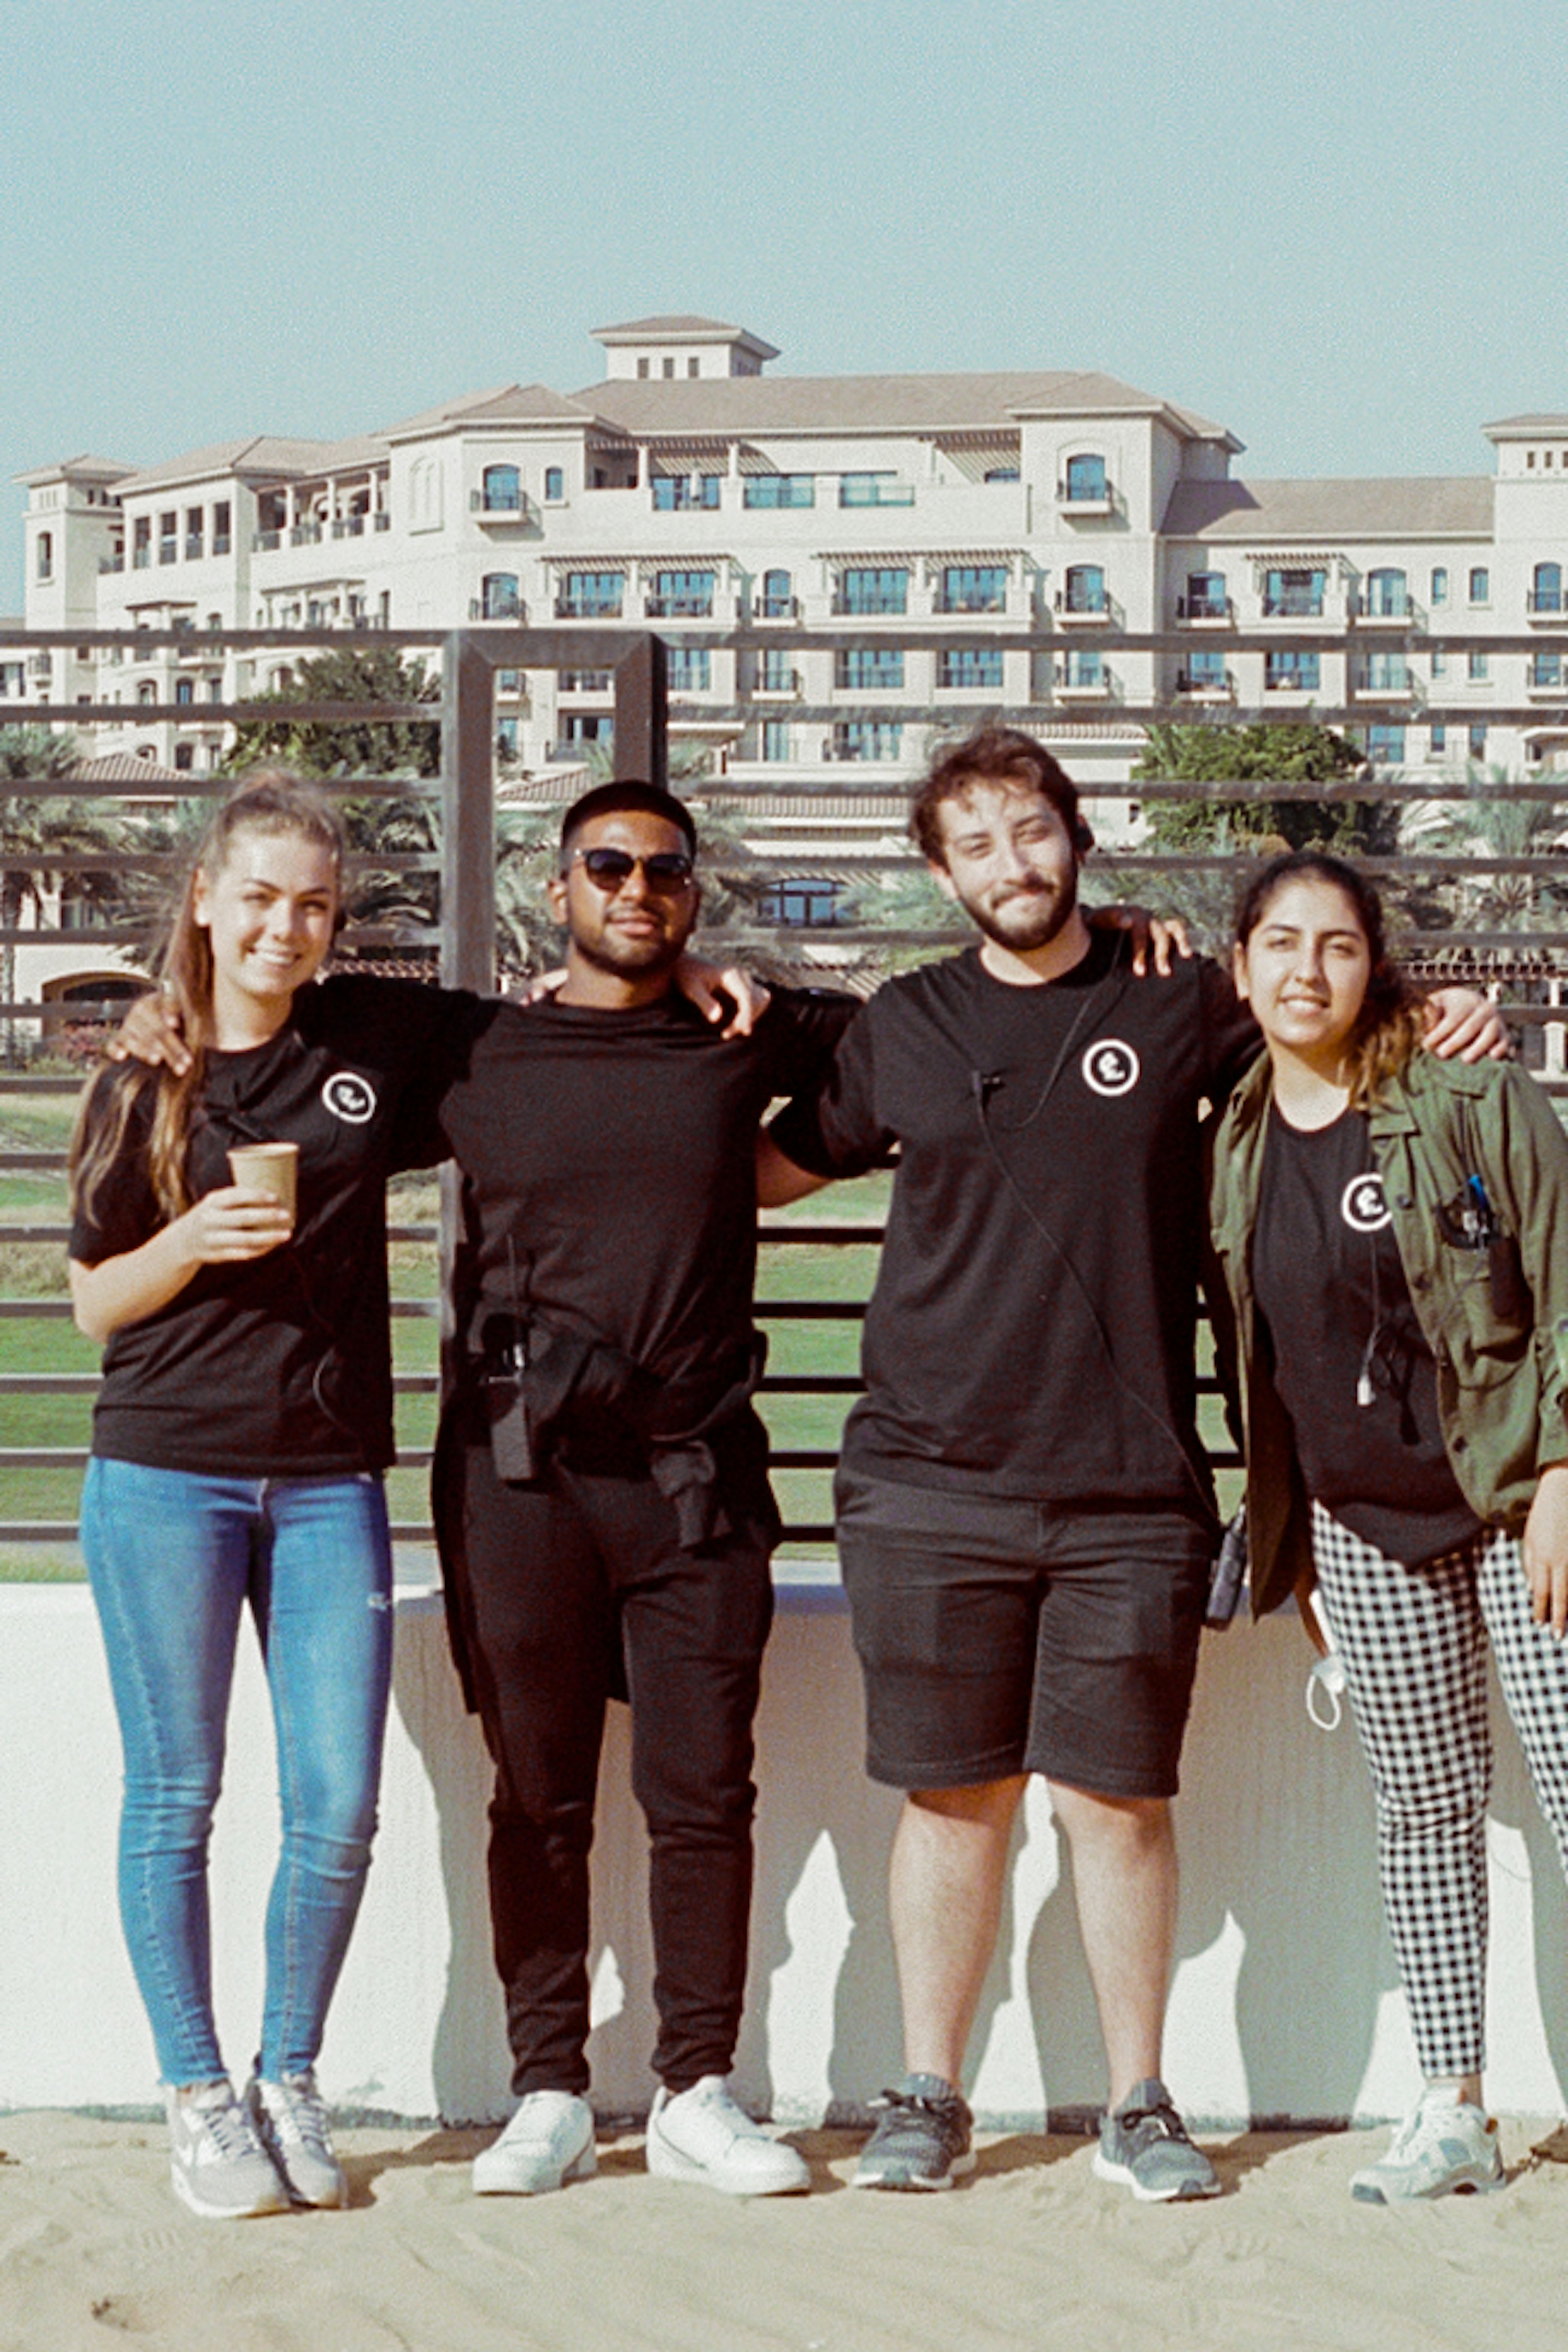 Feature | The electriclimefilms Internship Experience in Dubai